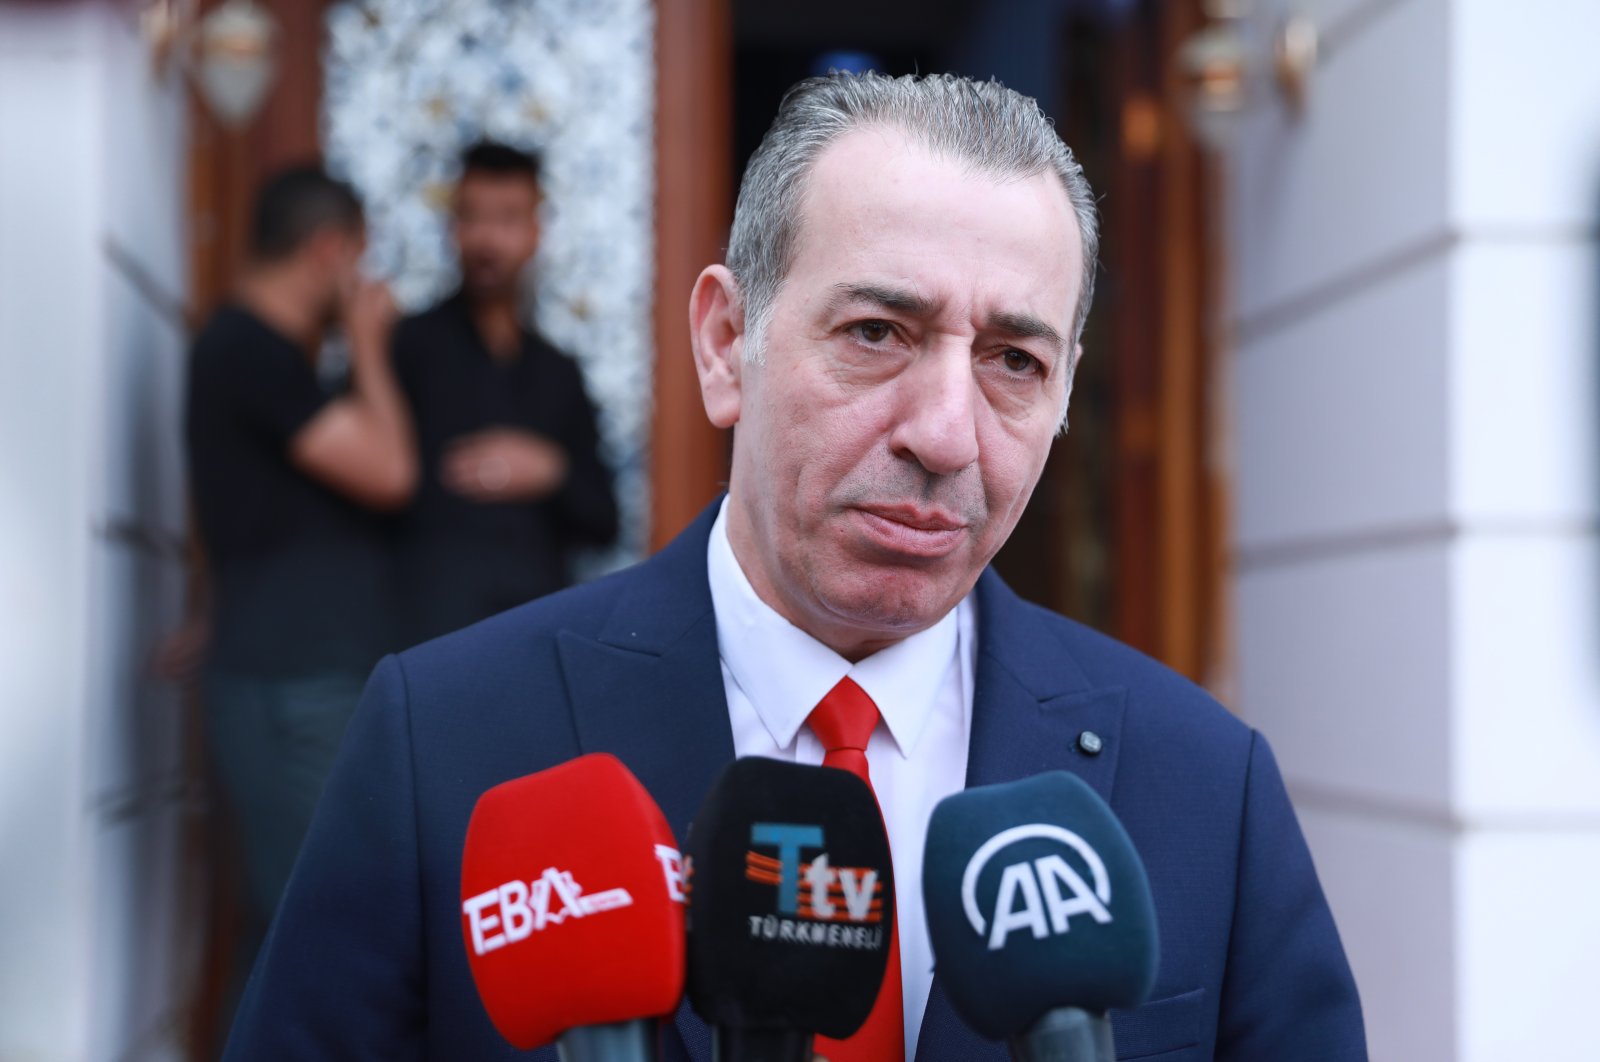 Kurdistan Regional Government (KRG) Minister of Ethnic and Religious Formations Aydın Maruf speaks to reporters in Irbil, Iraq, April 24, 2022. (AA Photo)